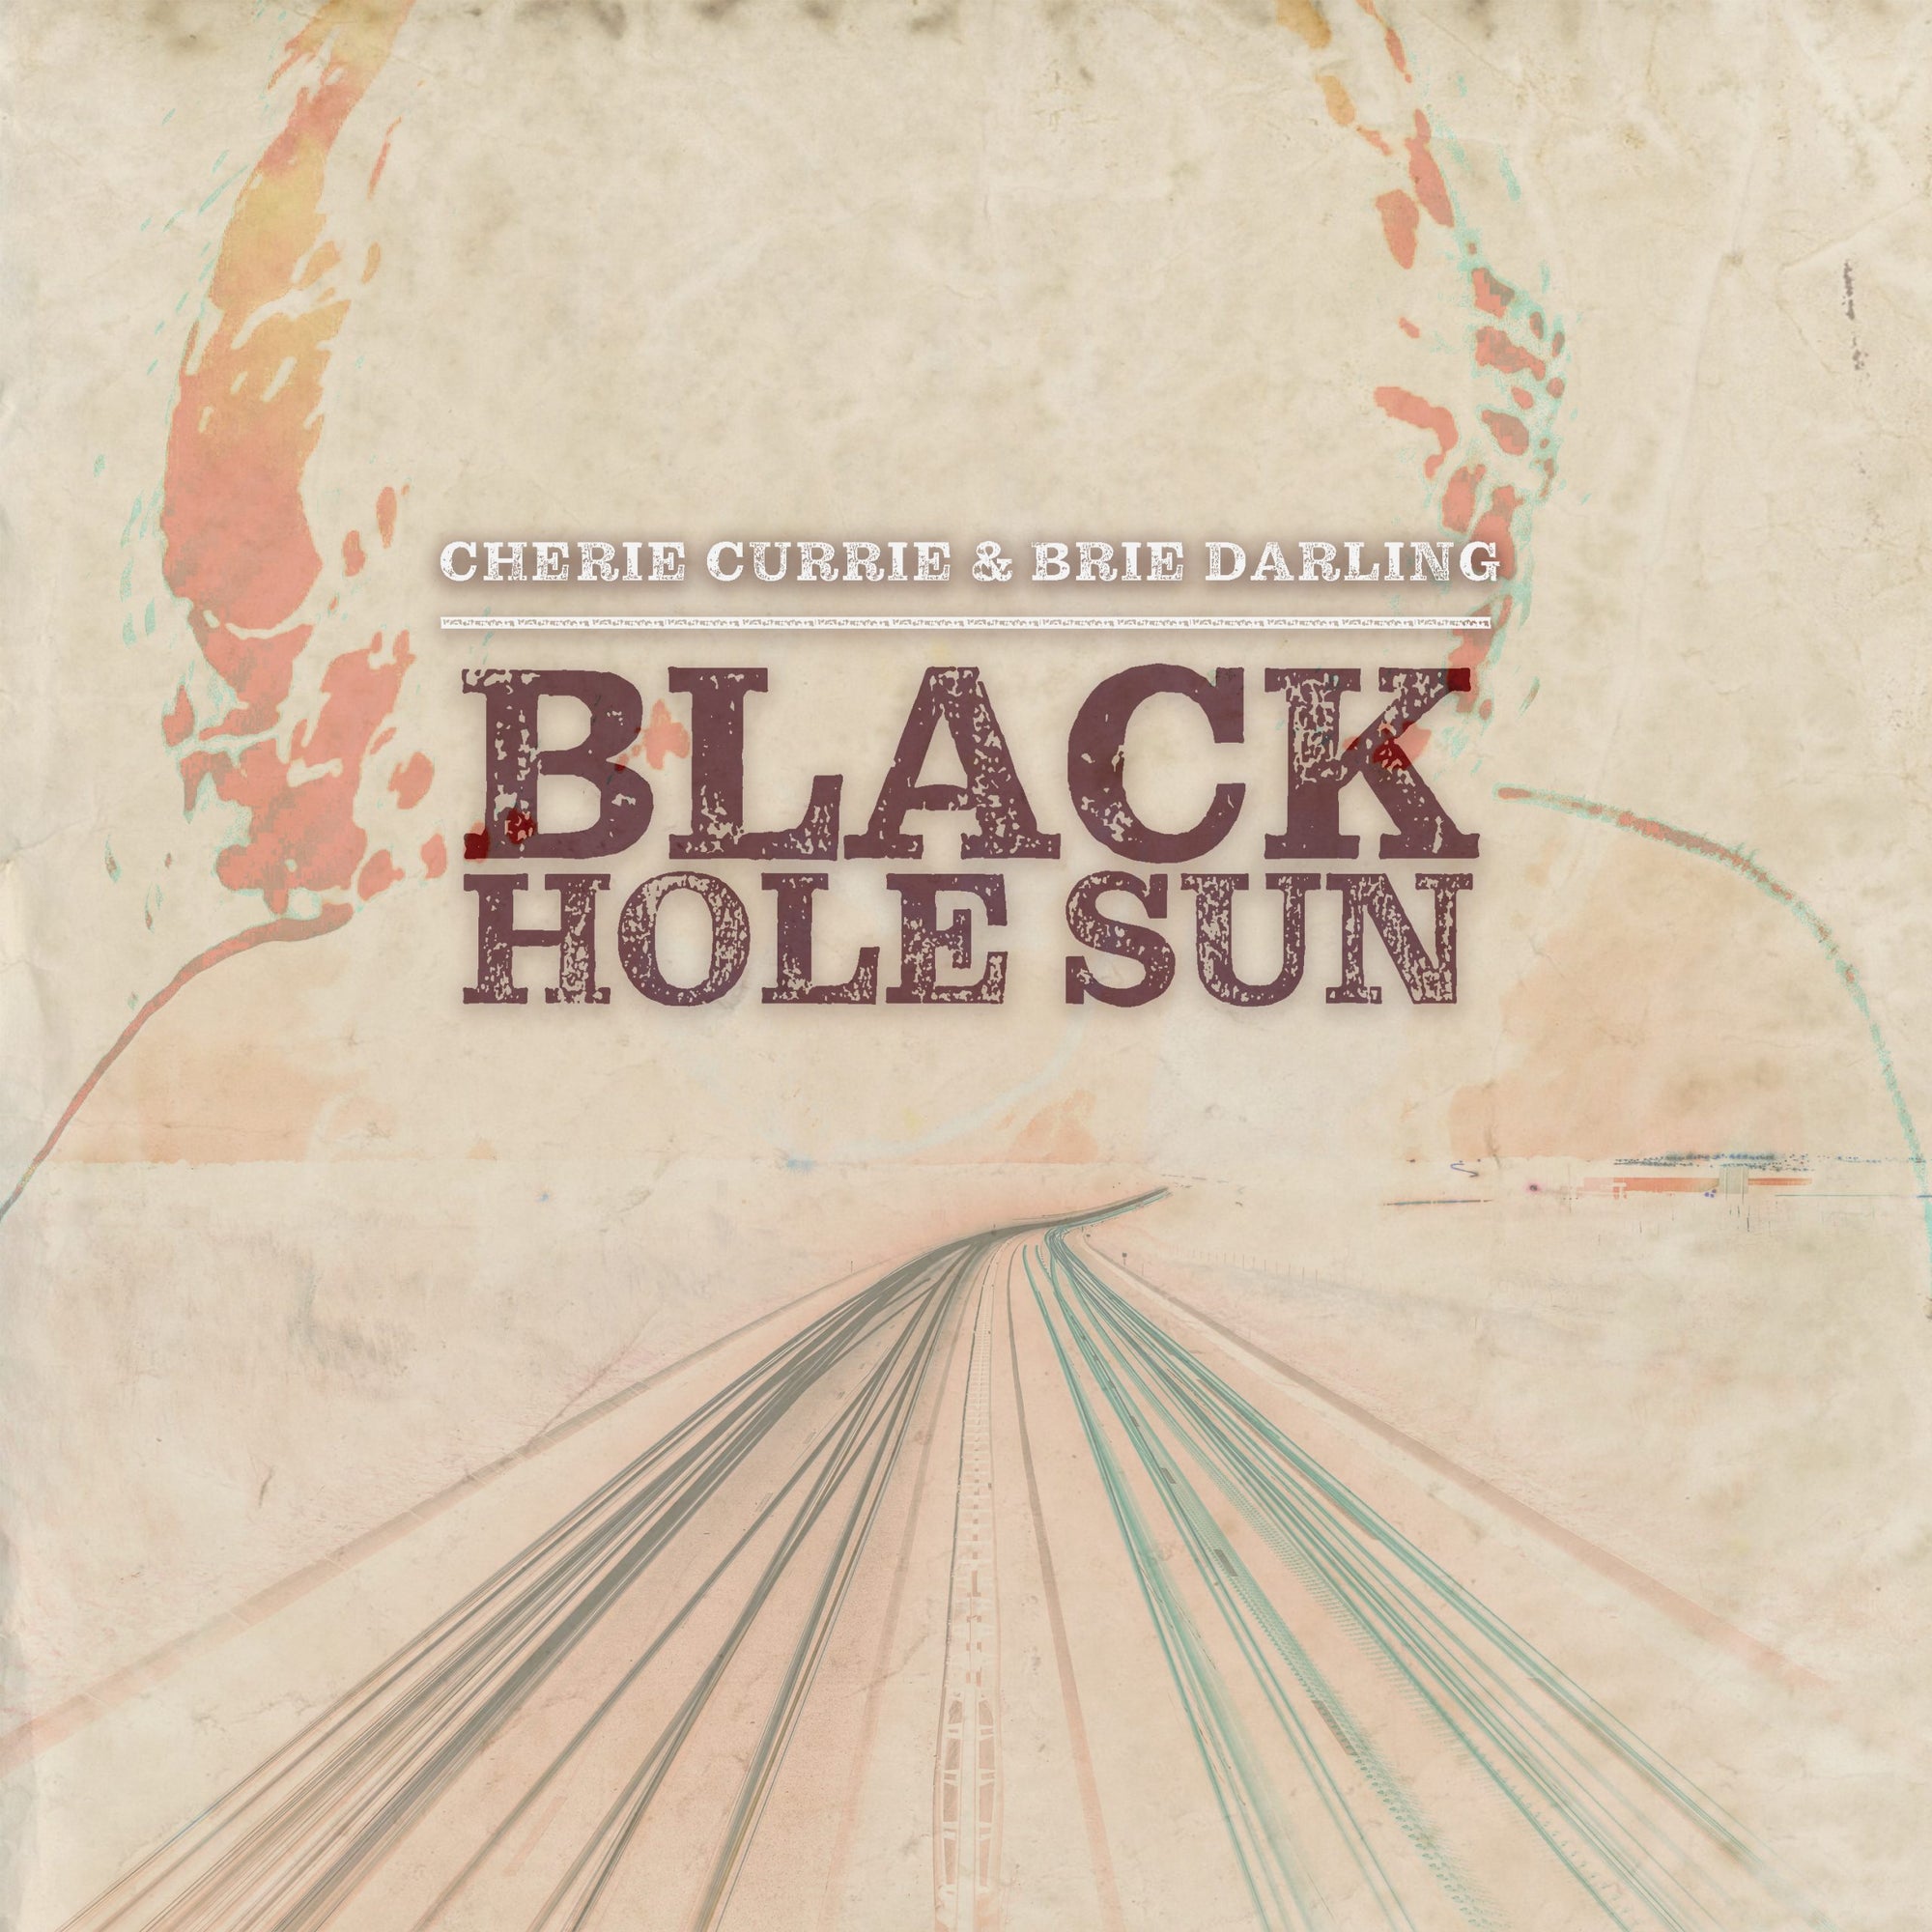 Cherie Currie & Brie Darling Keep The Promise With New Chris Cornell Cover, "Black Hole Sun"